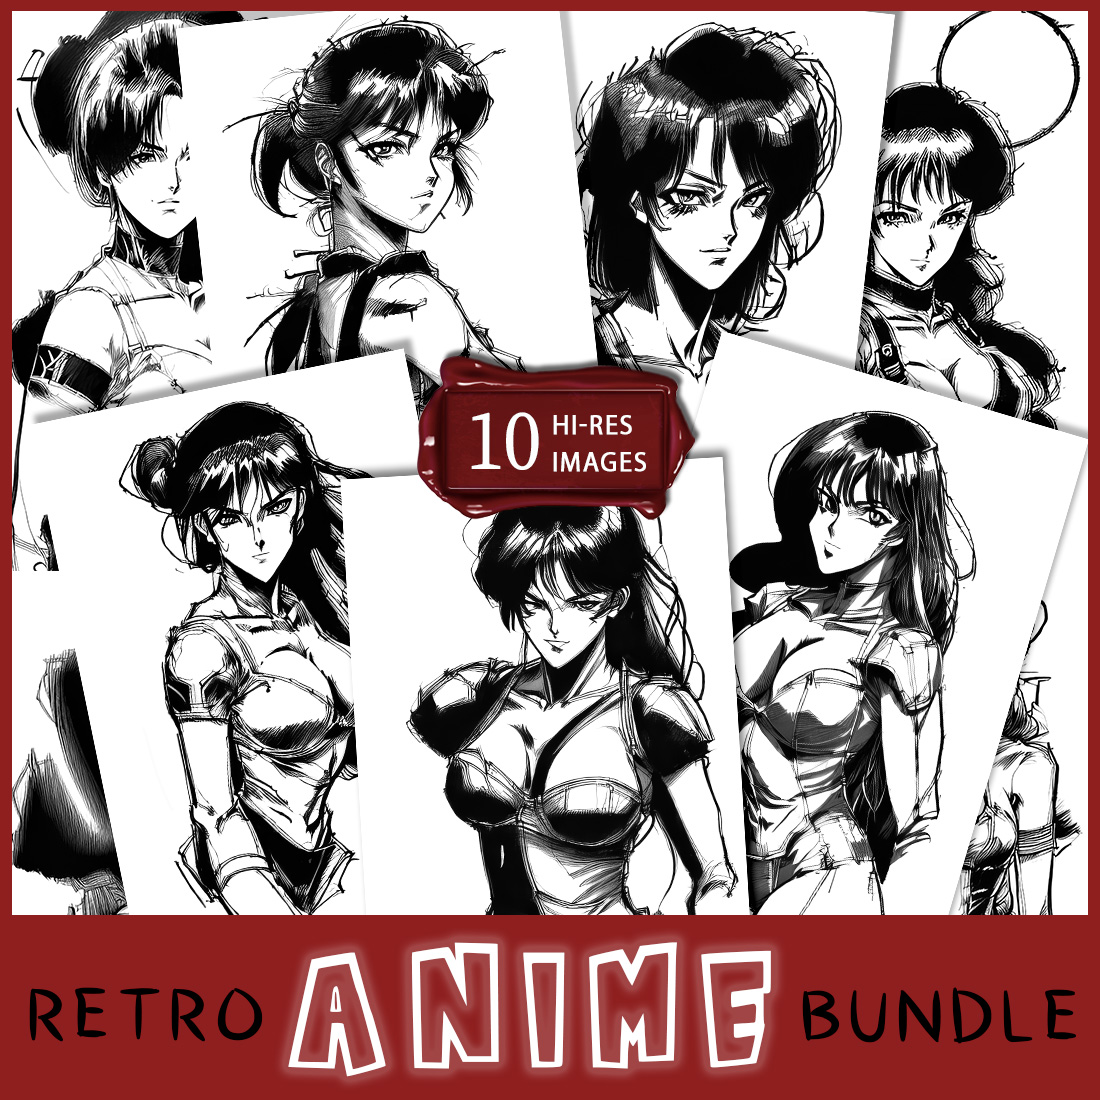 10 Retro Anime Female Characters cover image.